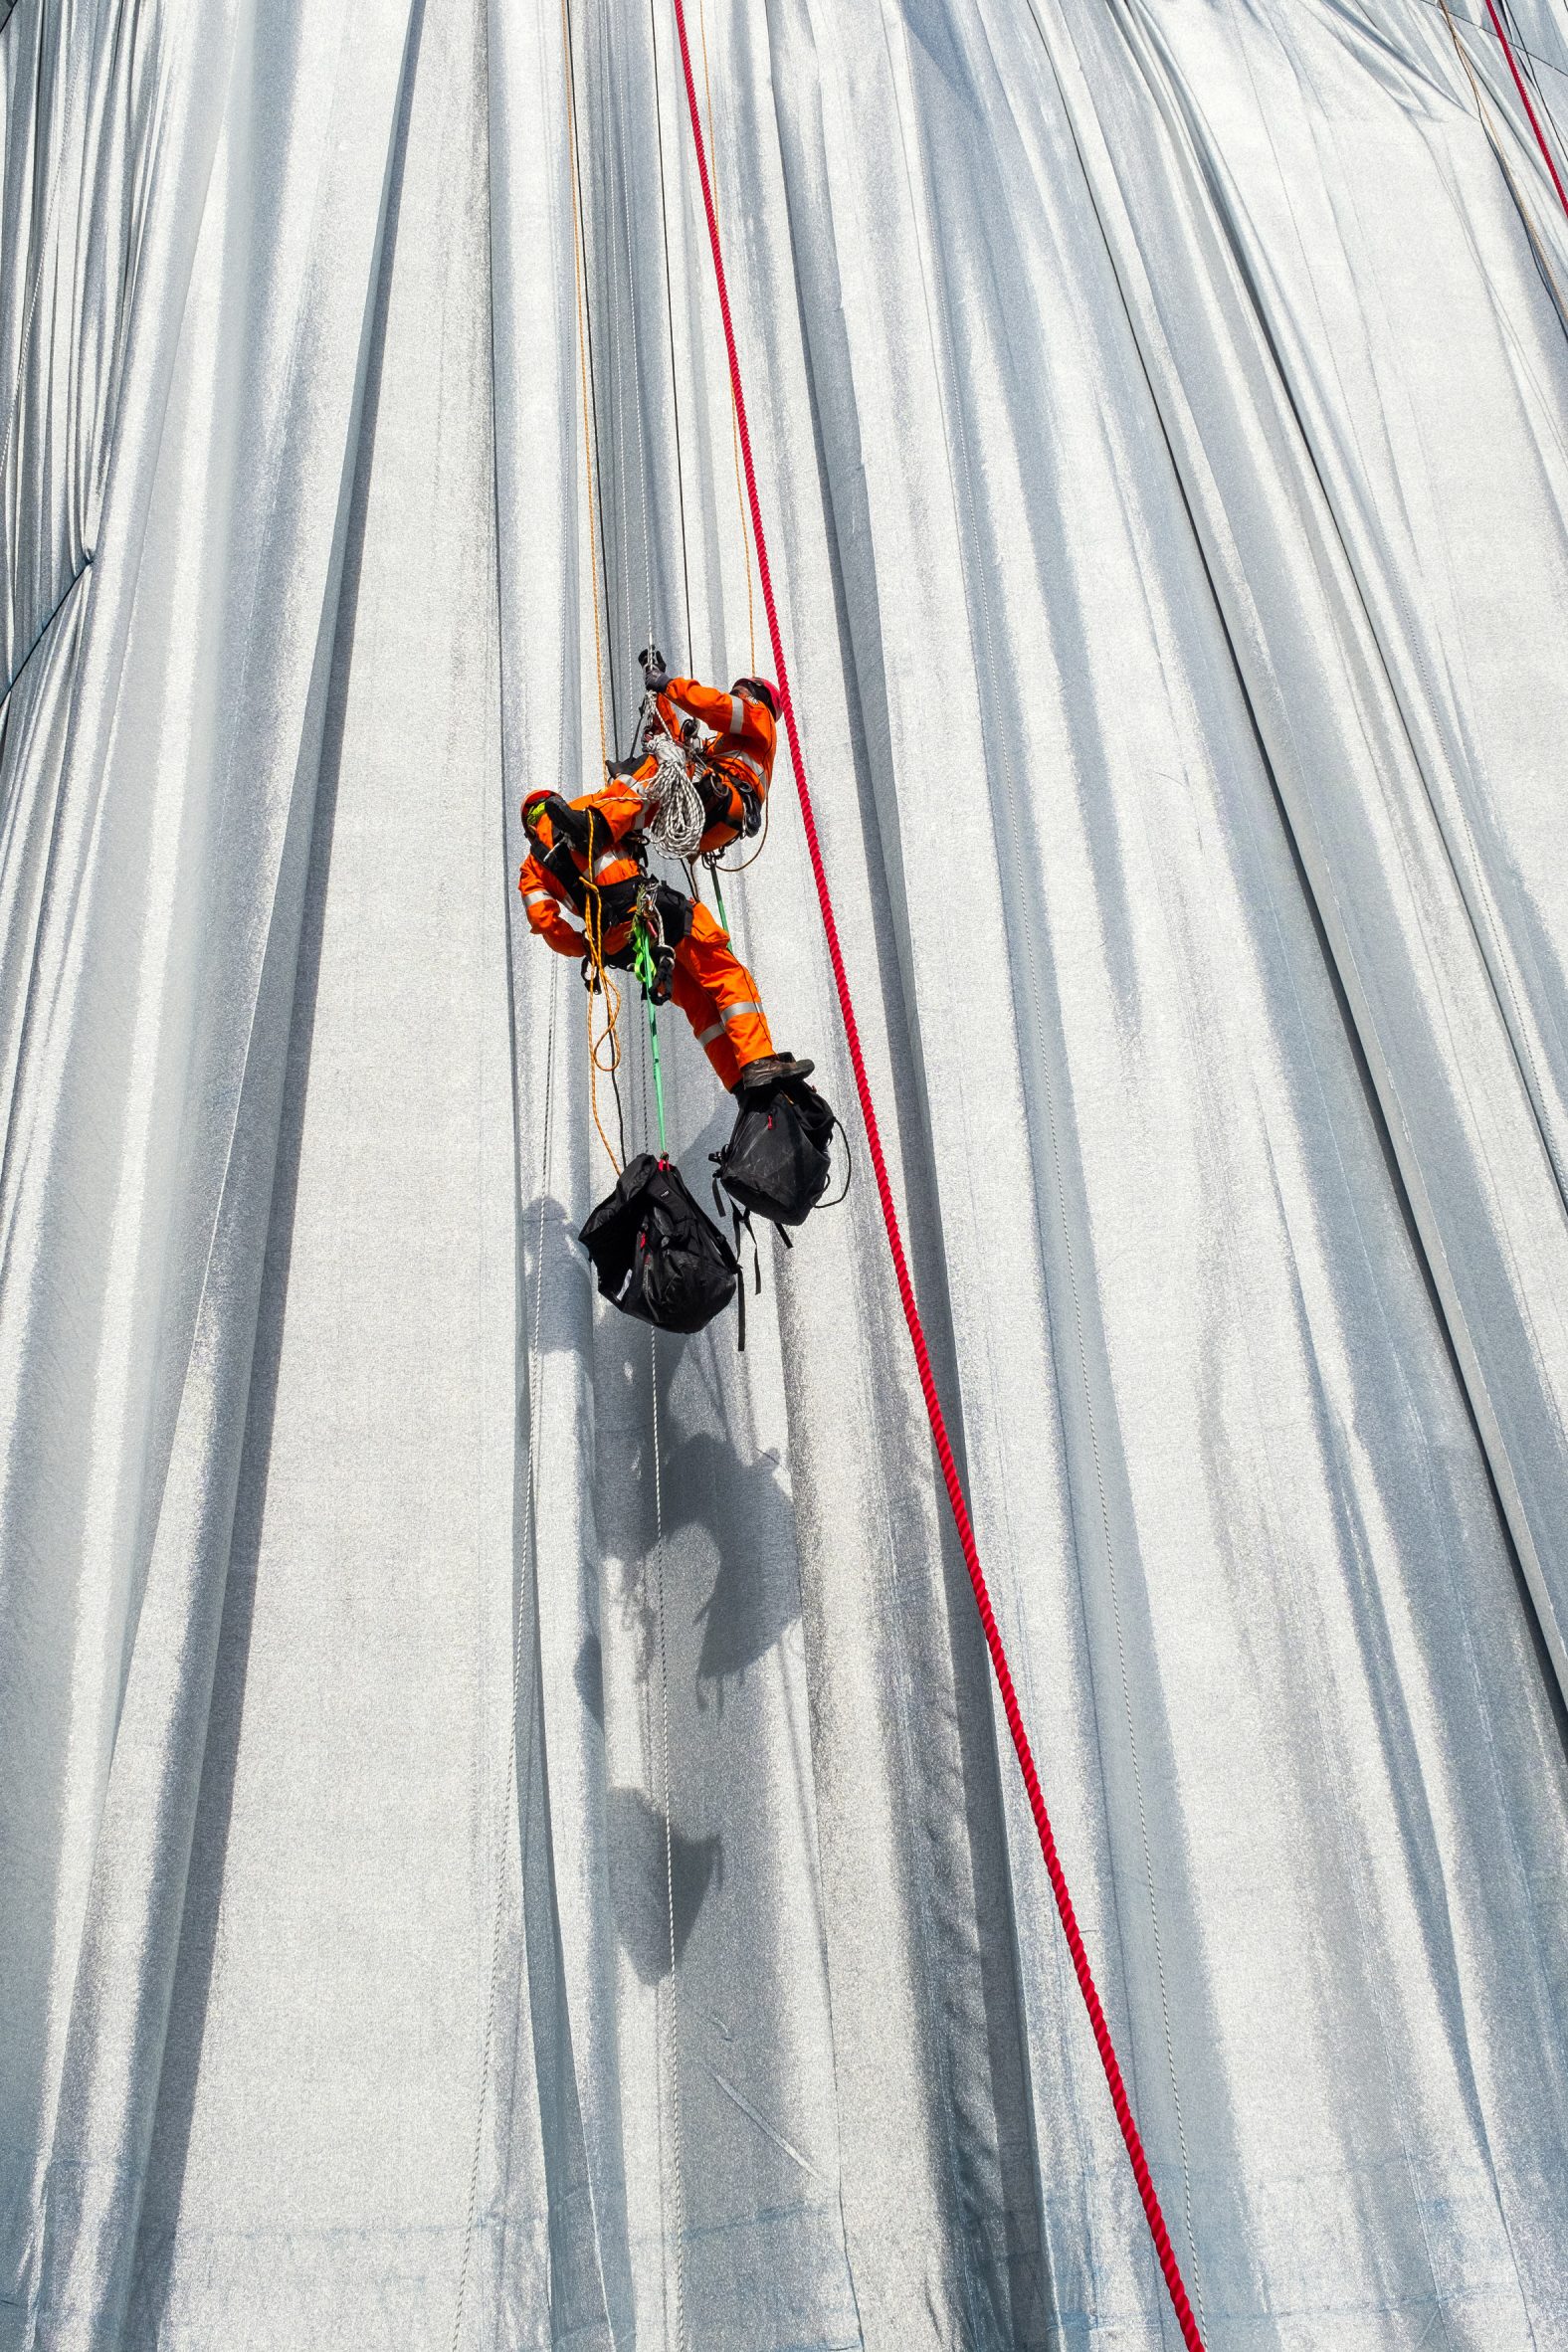 Photo of a two workers in high-vis gear hanging on the outside of the Christo and Jeanne-Claude's L'Arc de Triomphe Wrapped installation, showing the red ropes and silvery fabric up close